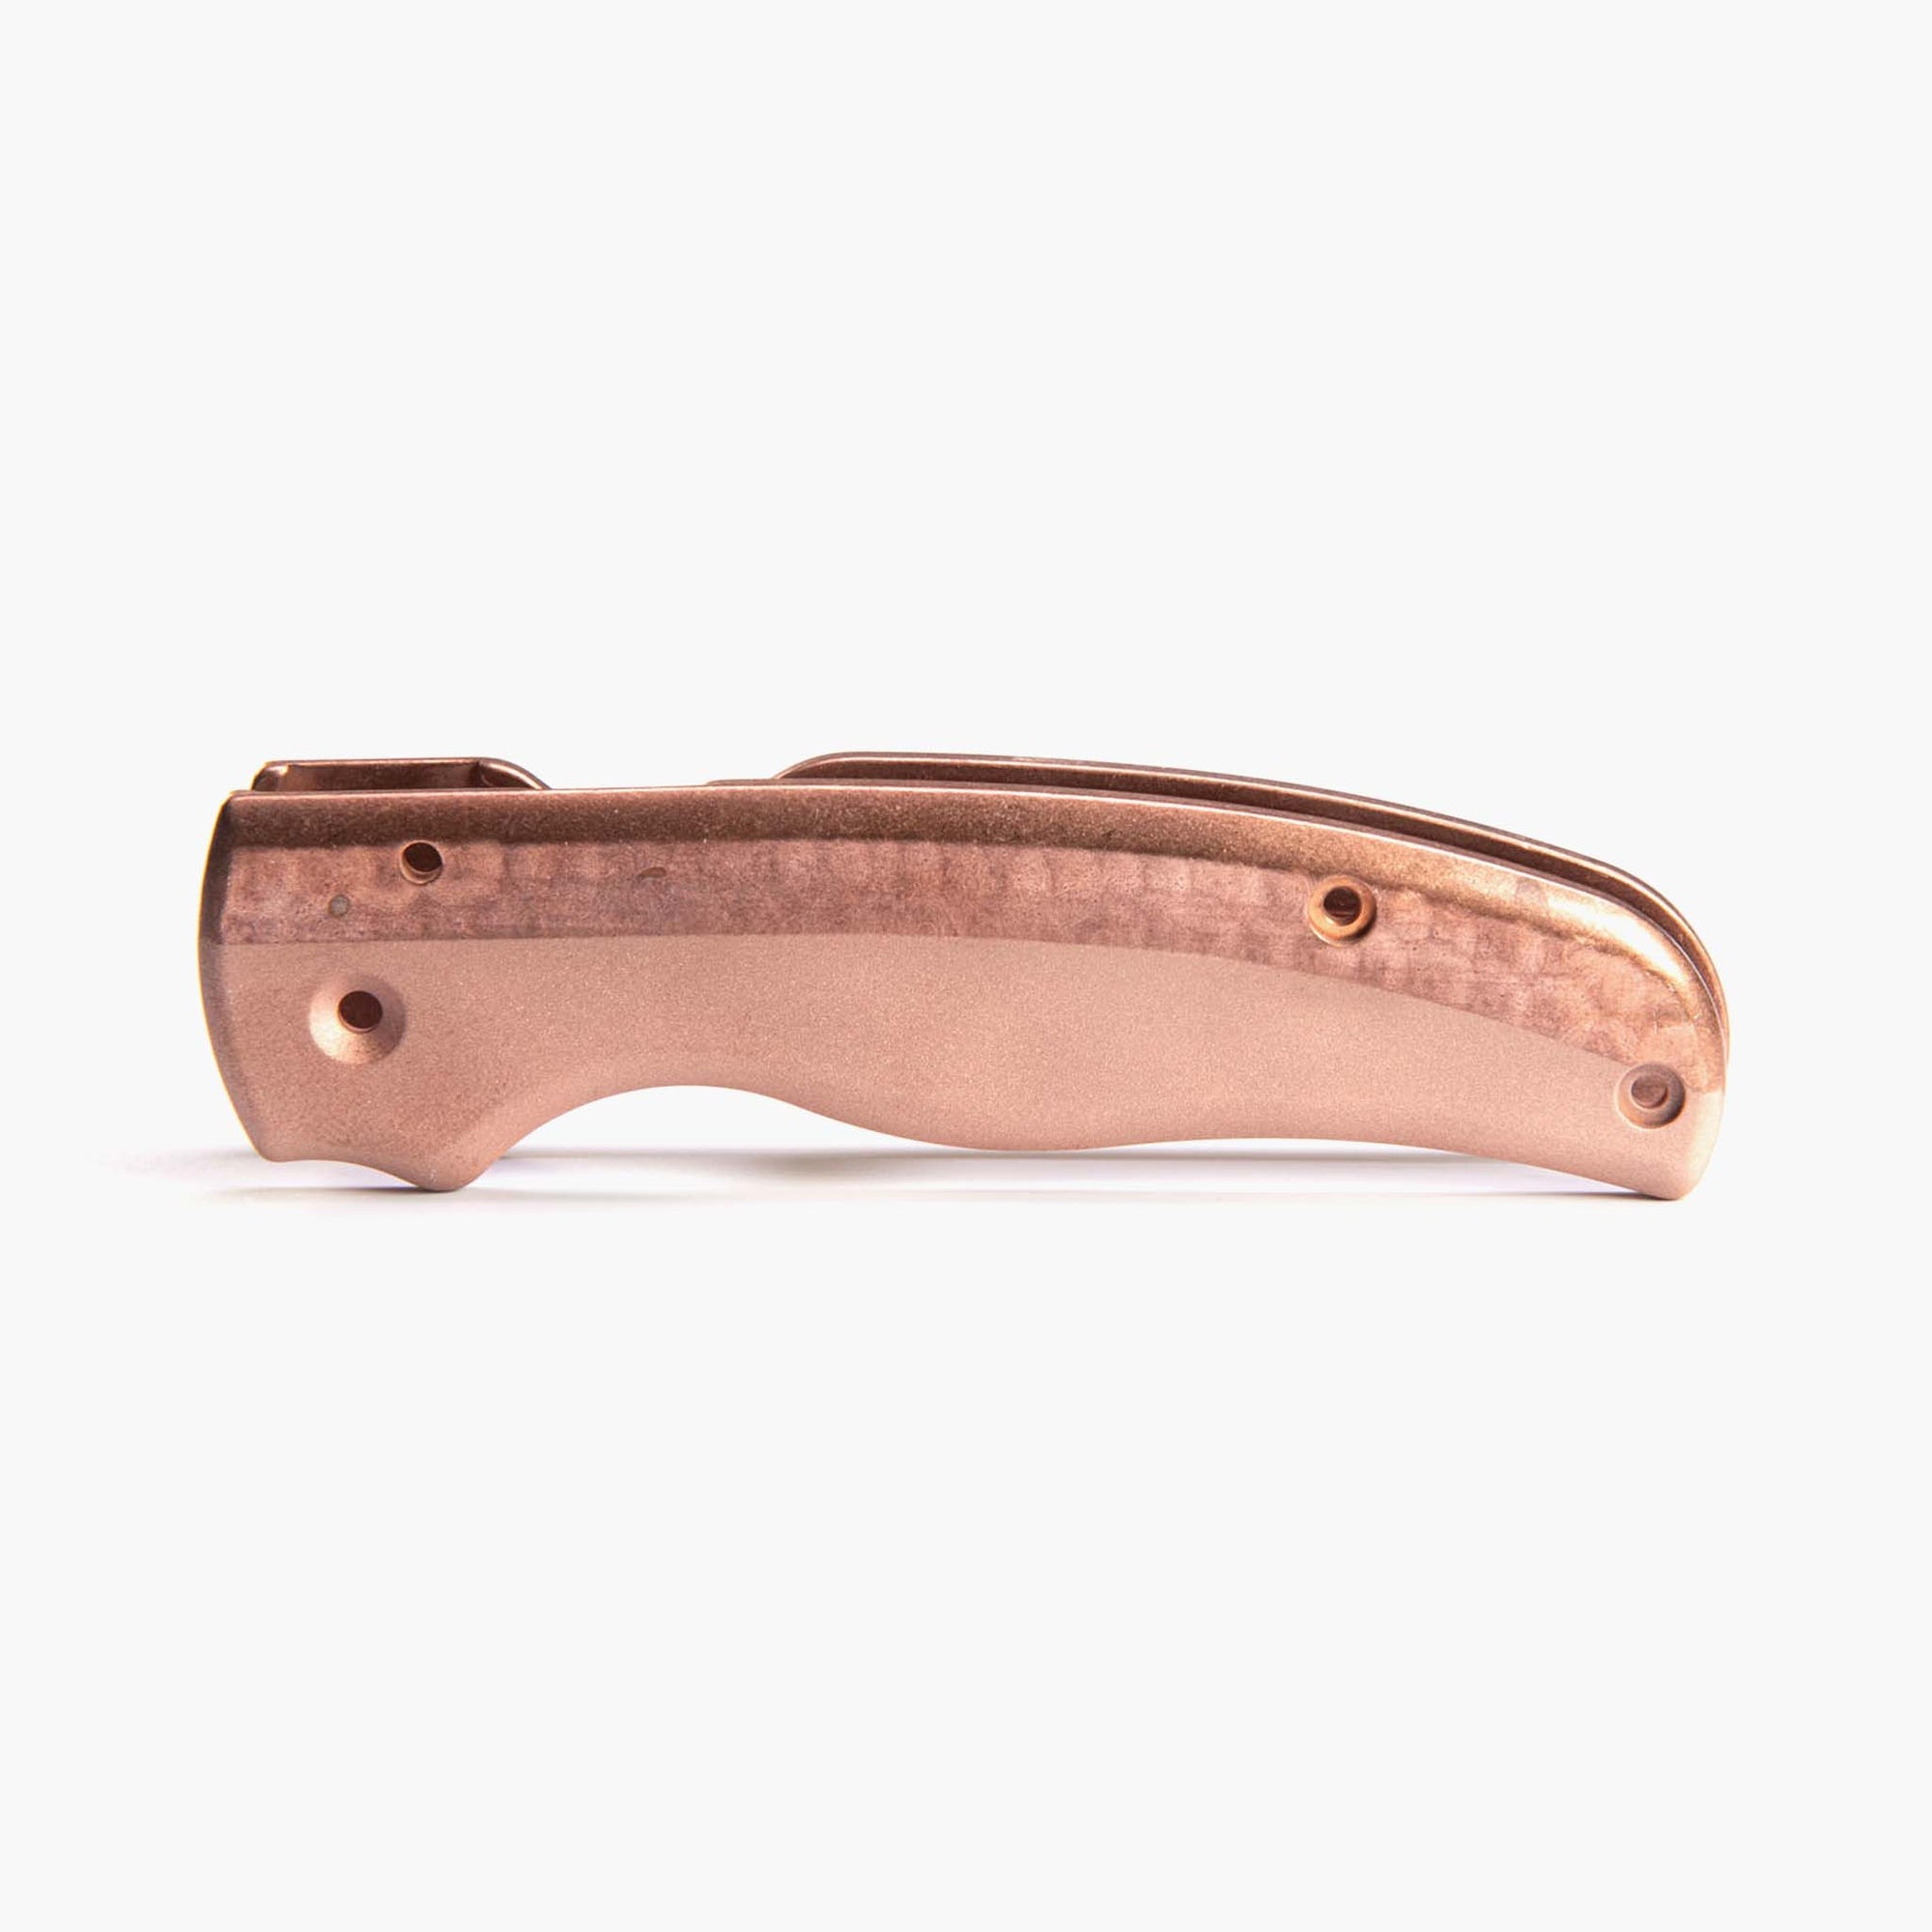 LTD Jeweled Copper Scales for Spyderco Shaman Knife